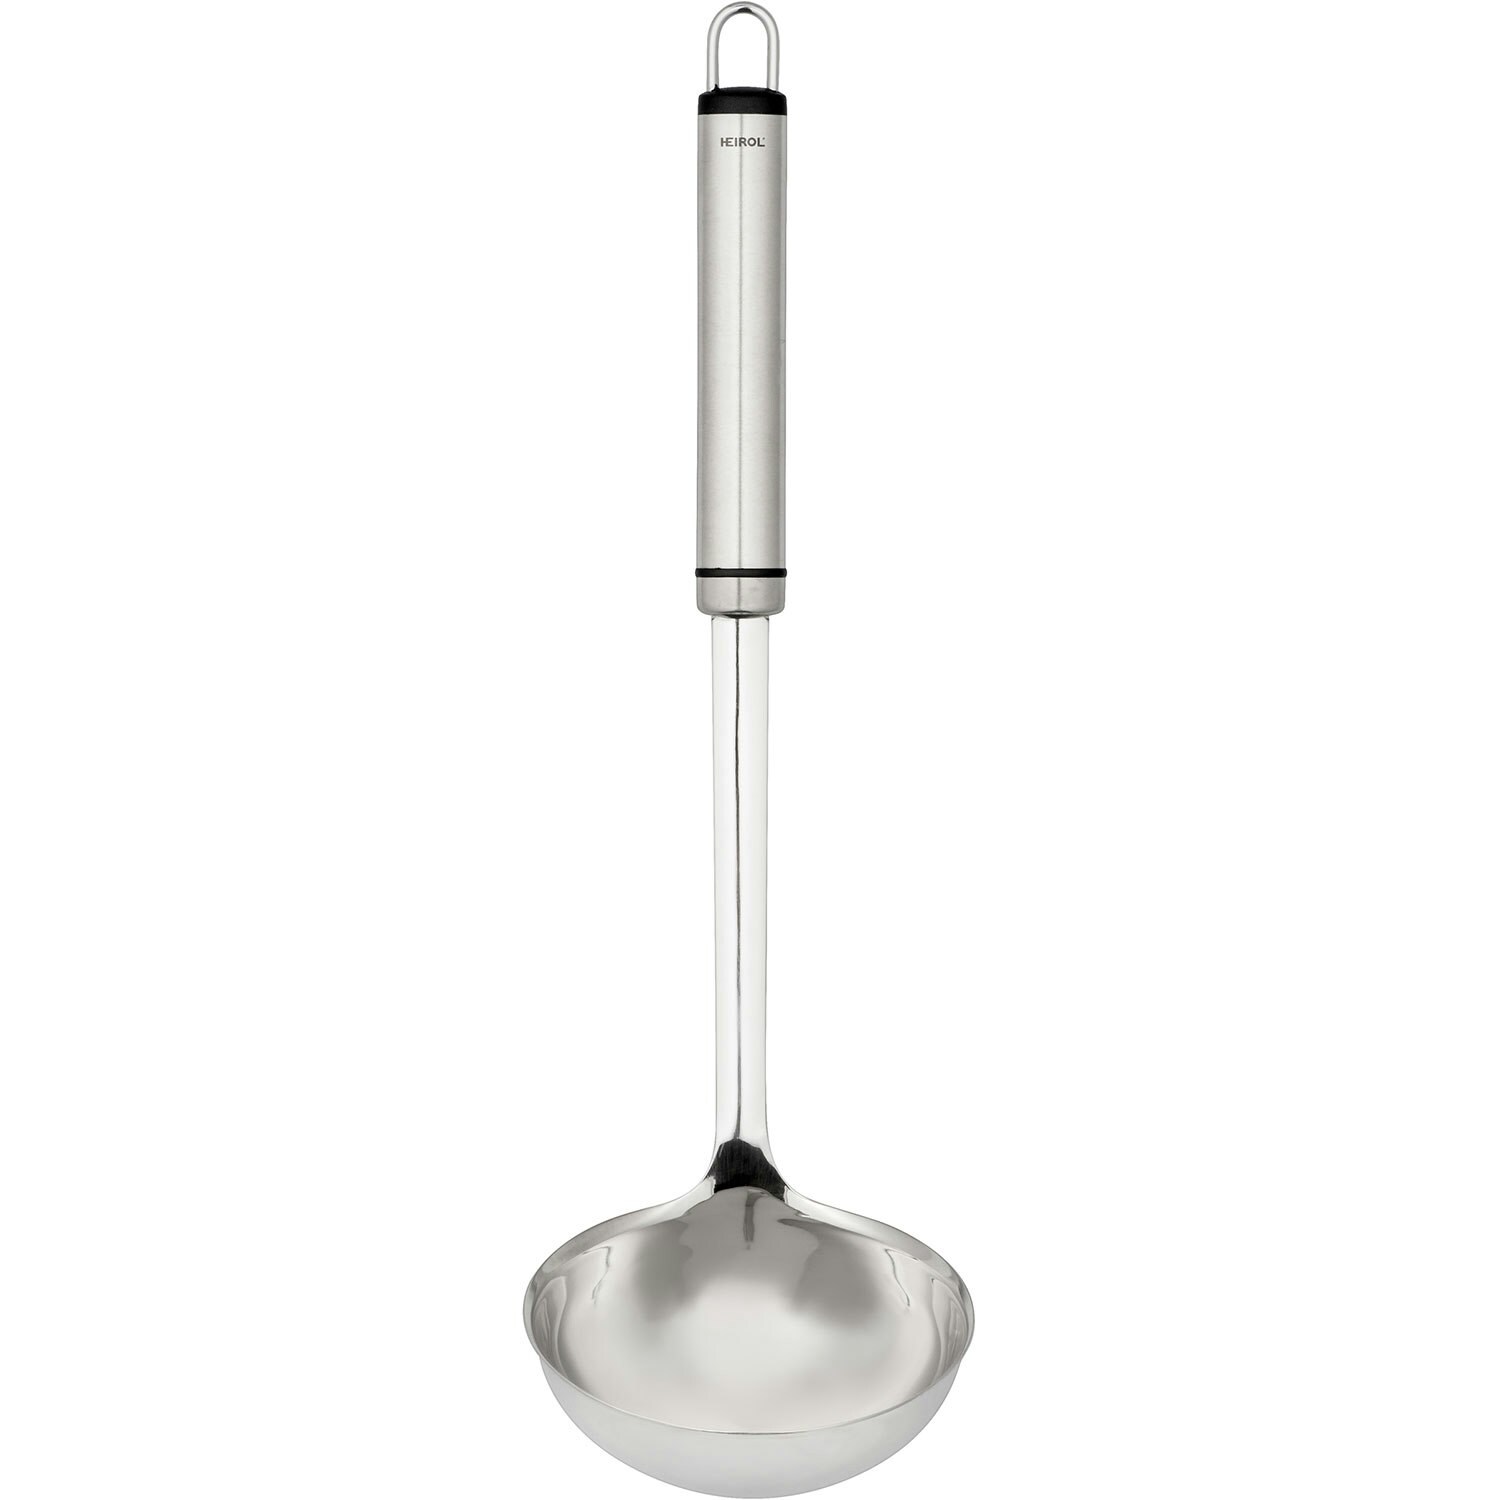 Tea Brewing Thermometer TB225R